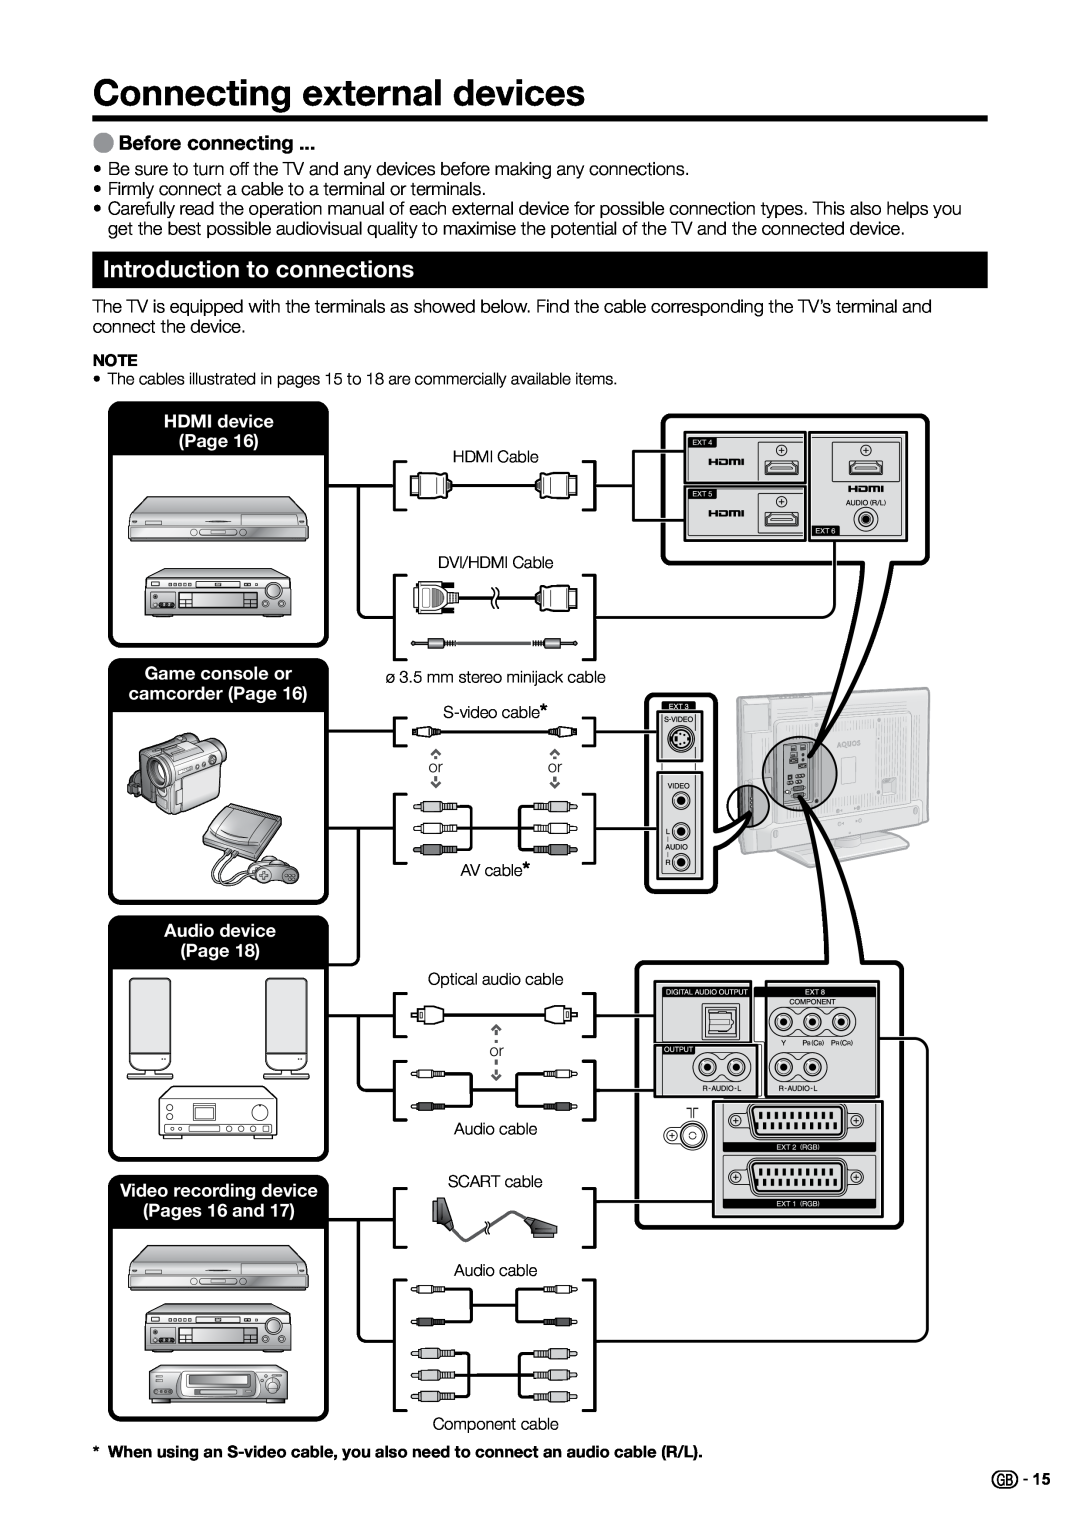 Sharp LC-37G20E, LC-37B20S Connecting external devices, Introduction to connections, EBefore connecting, HDMI device Page 